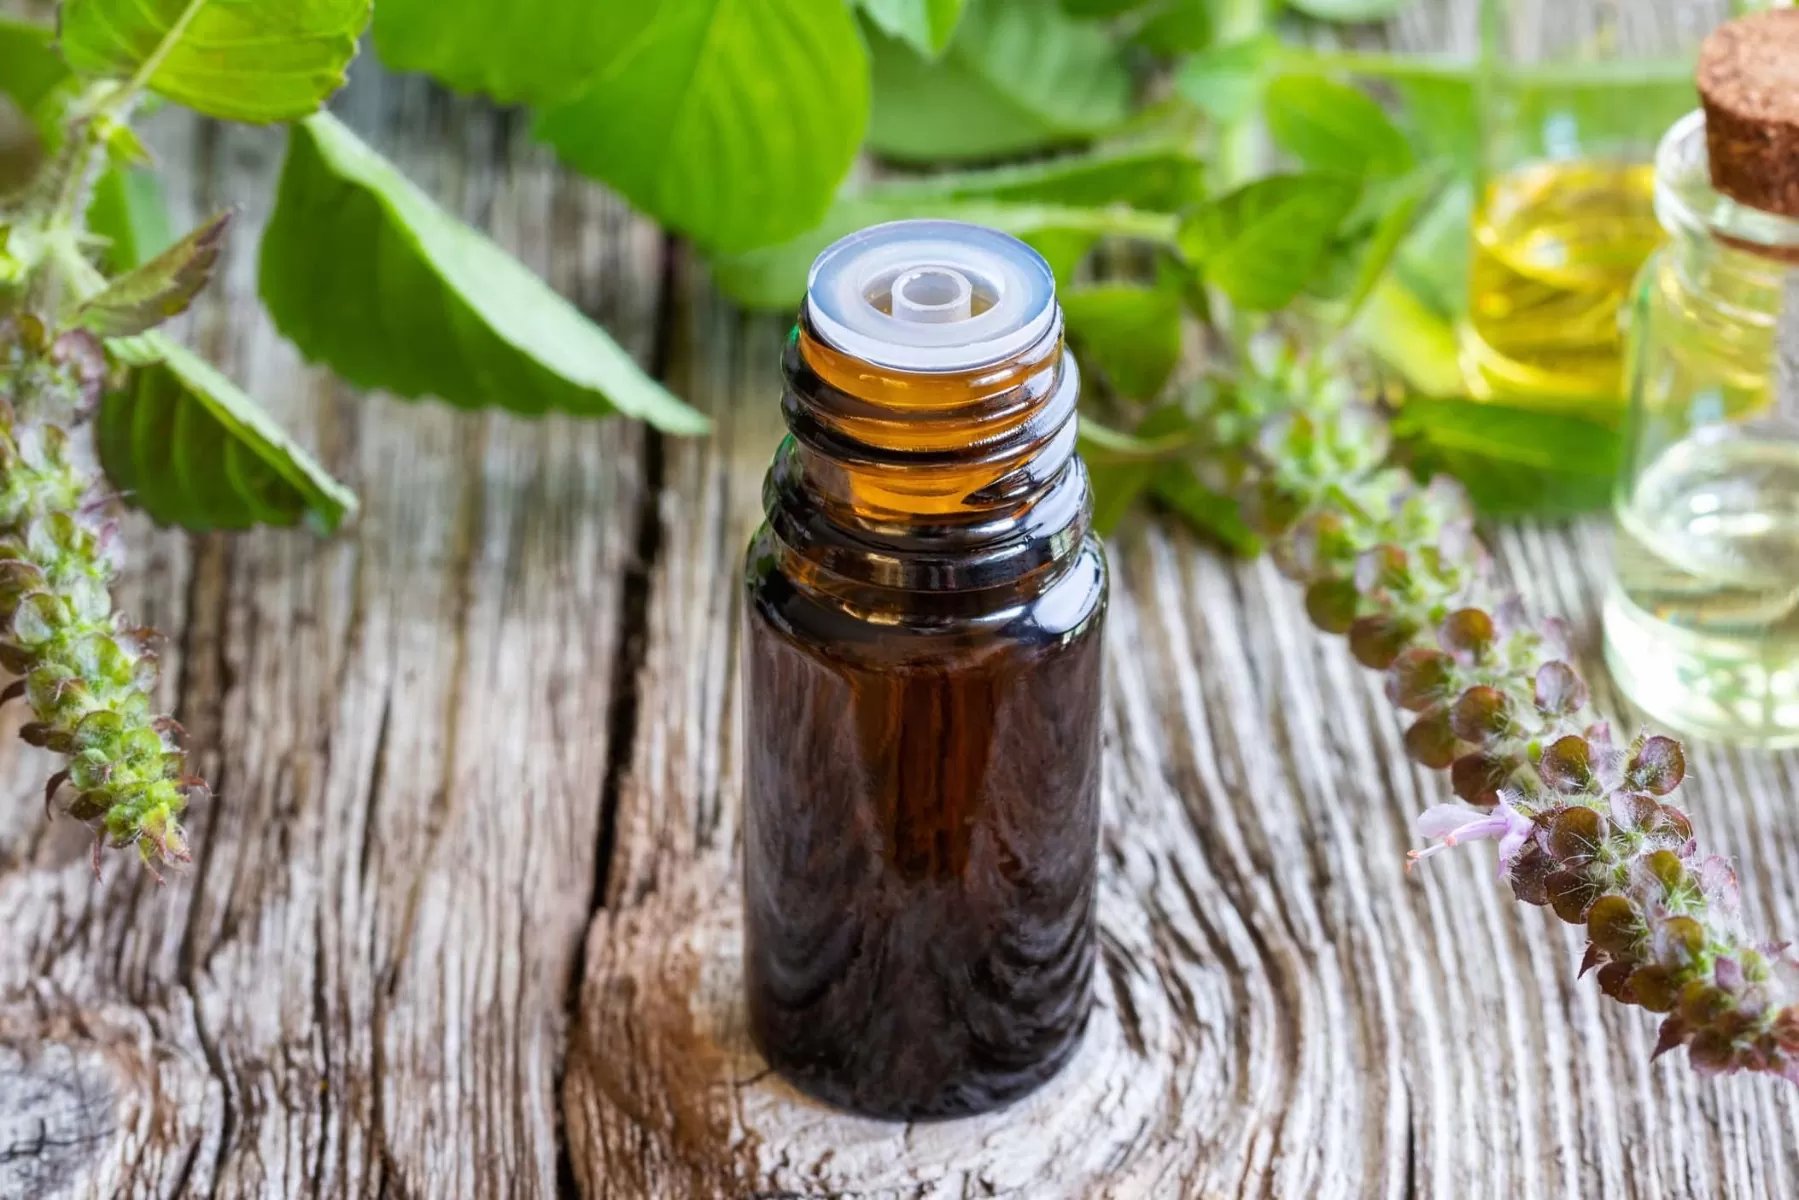 How To Make Basil Essential Oil